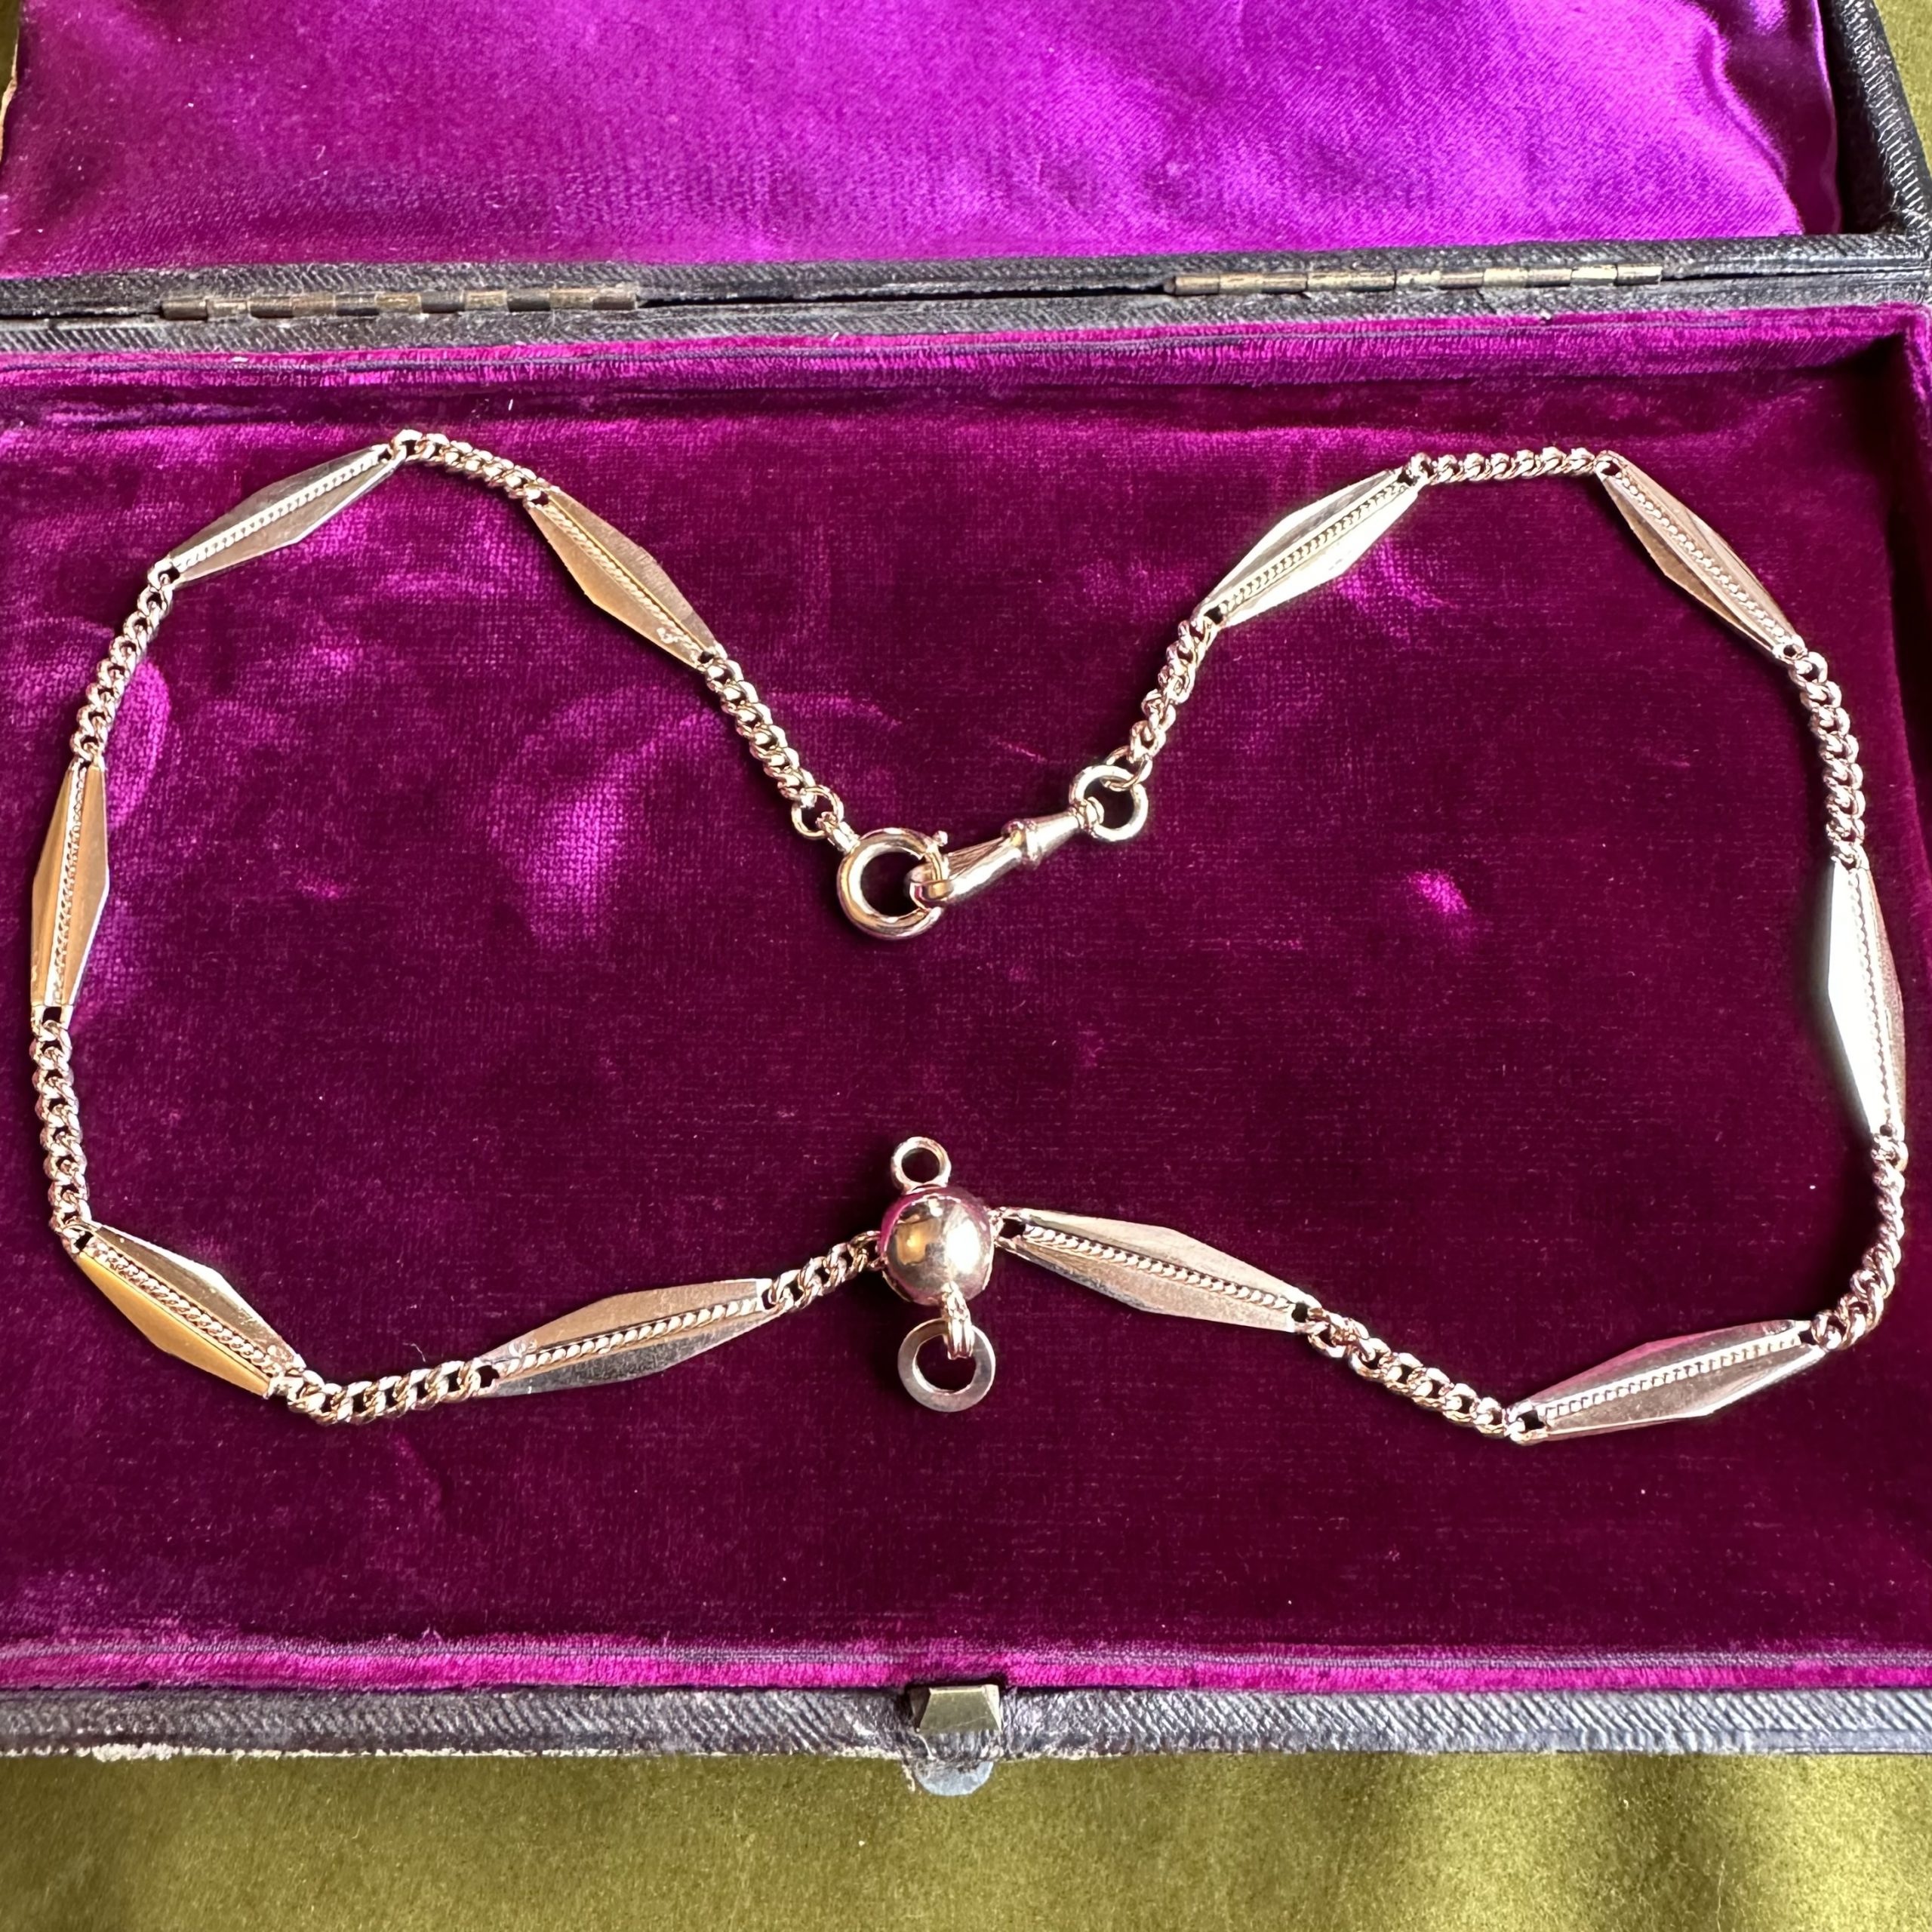 Diamond 14ct Gold Necklace – The Goldsmiths Gallery Limited